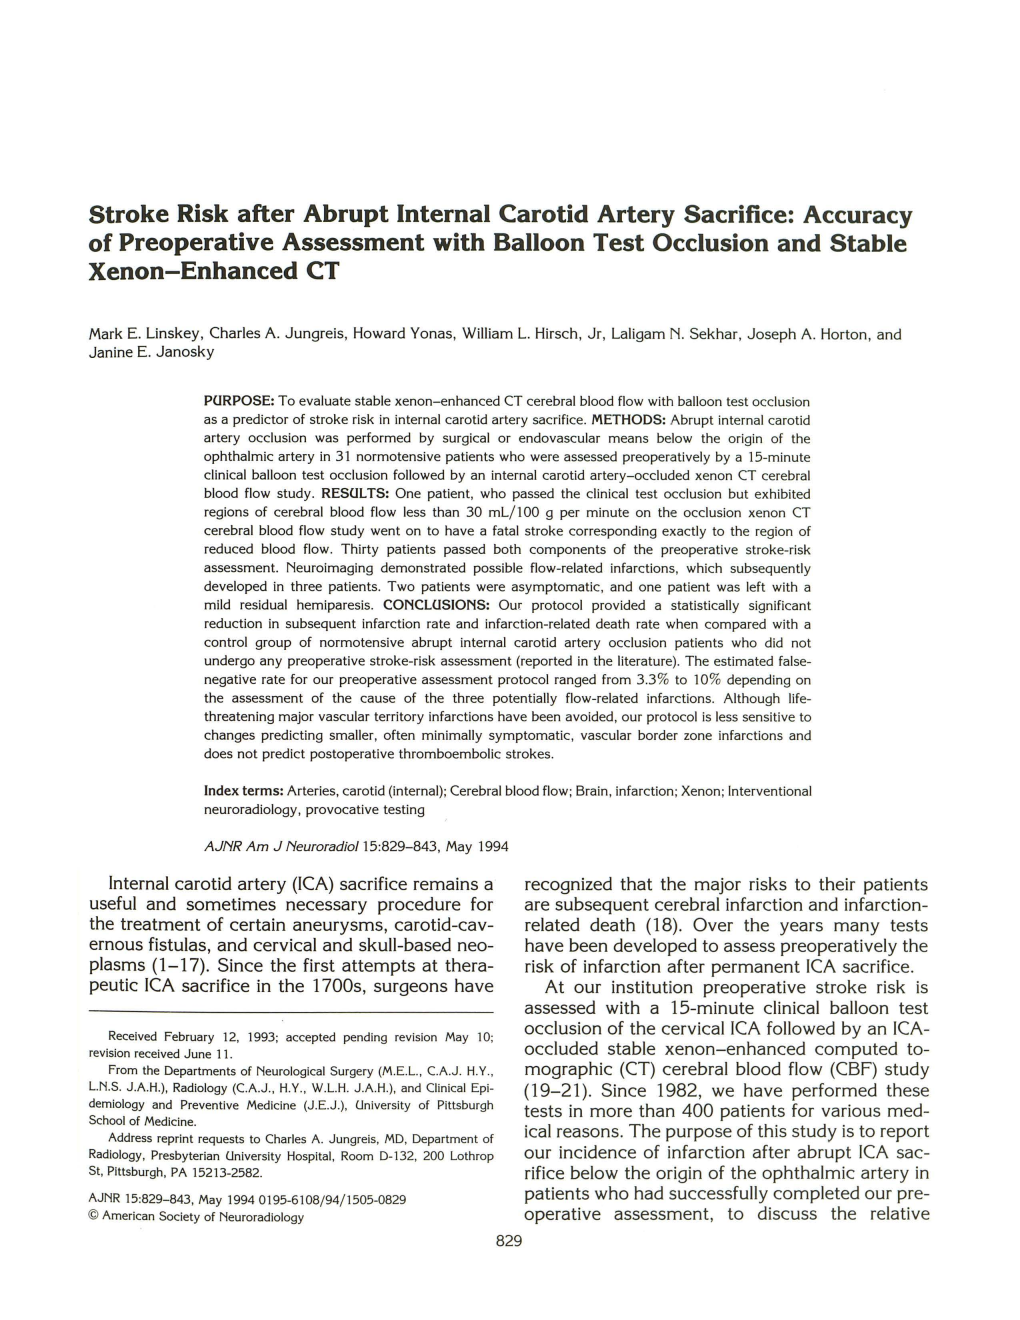 Stroke Risk After Abrupt Internal Carotid Artery Sacrifice: Accuracy of Preoperative Assessment with Balloon Test Occlusion and Stable Xenon-Enhanced CT